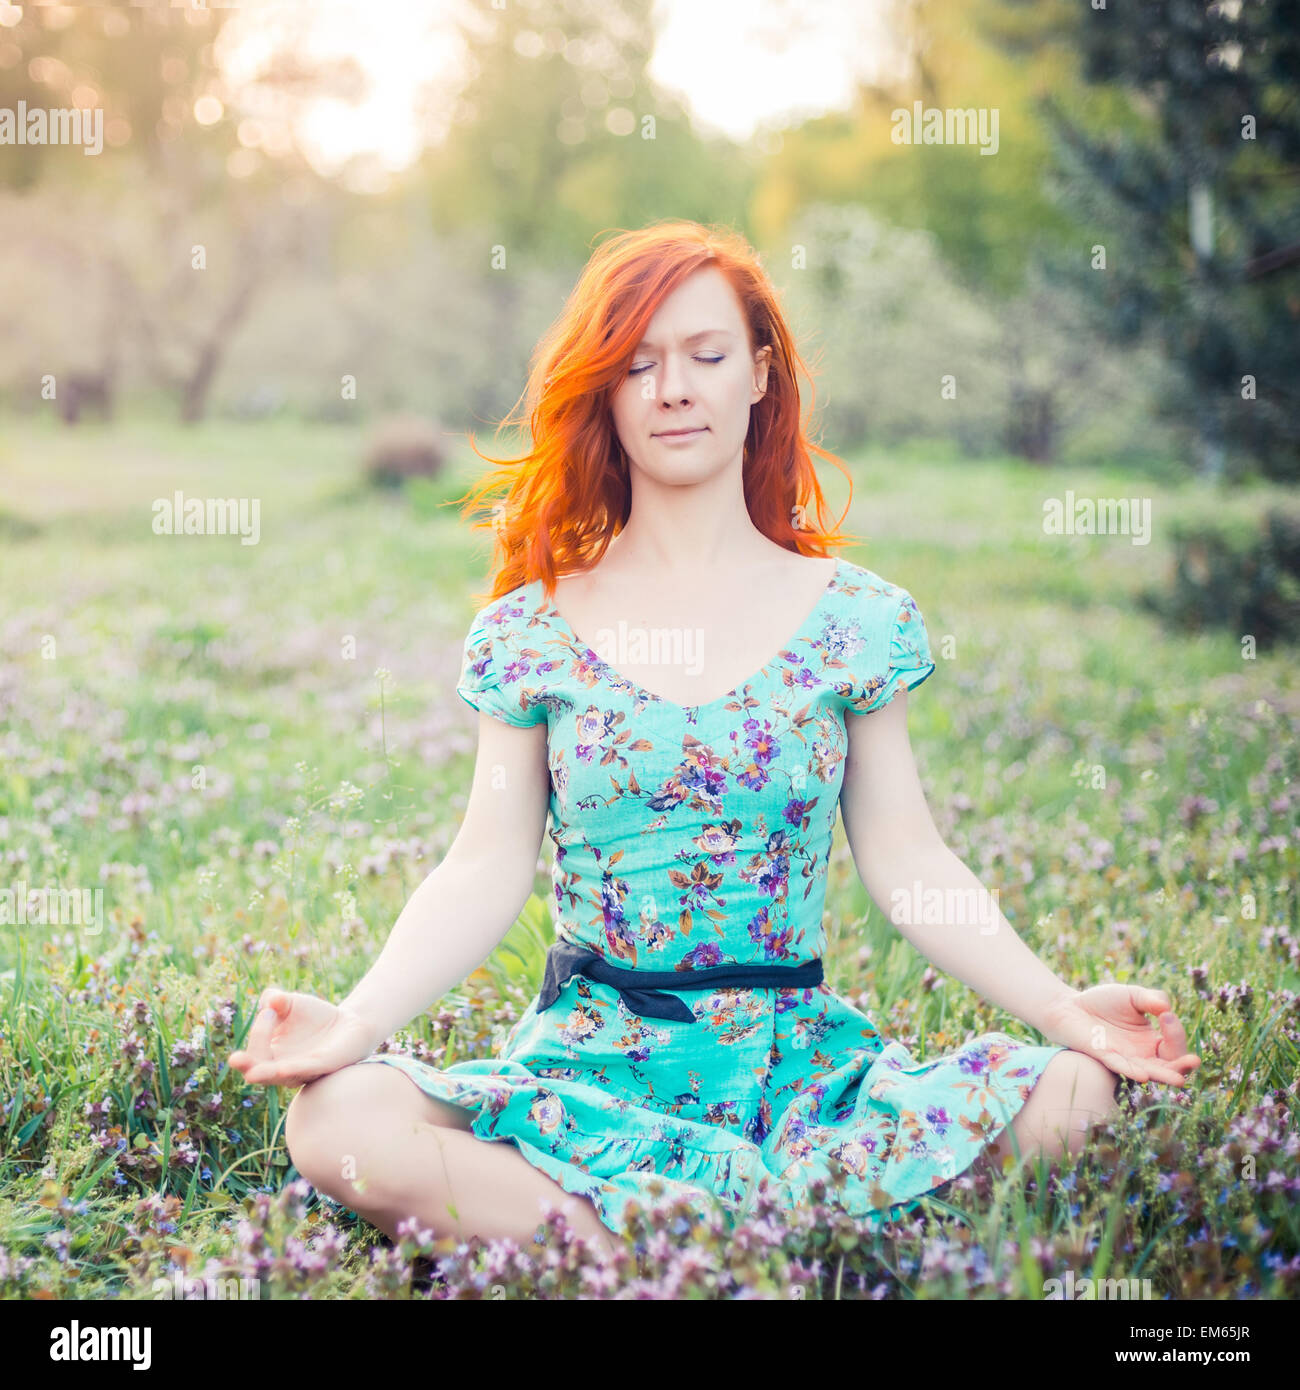 Young woman doing yoga in Park Banque D'Images